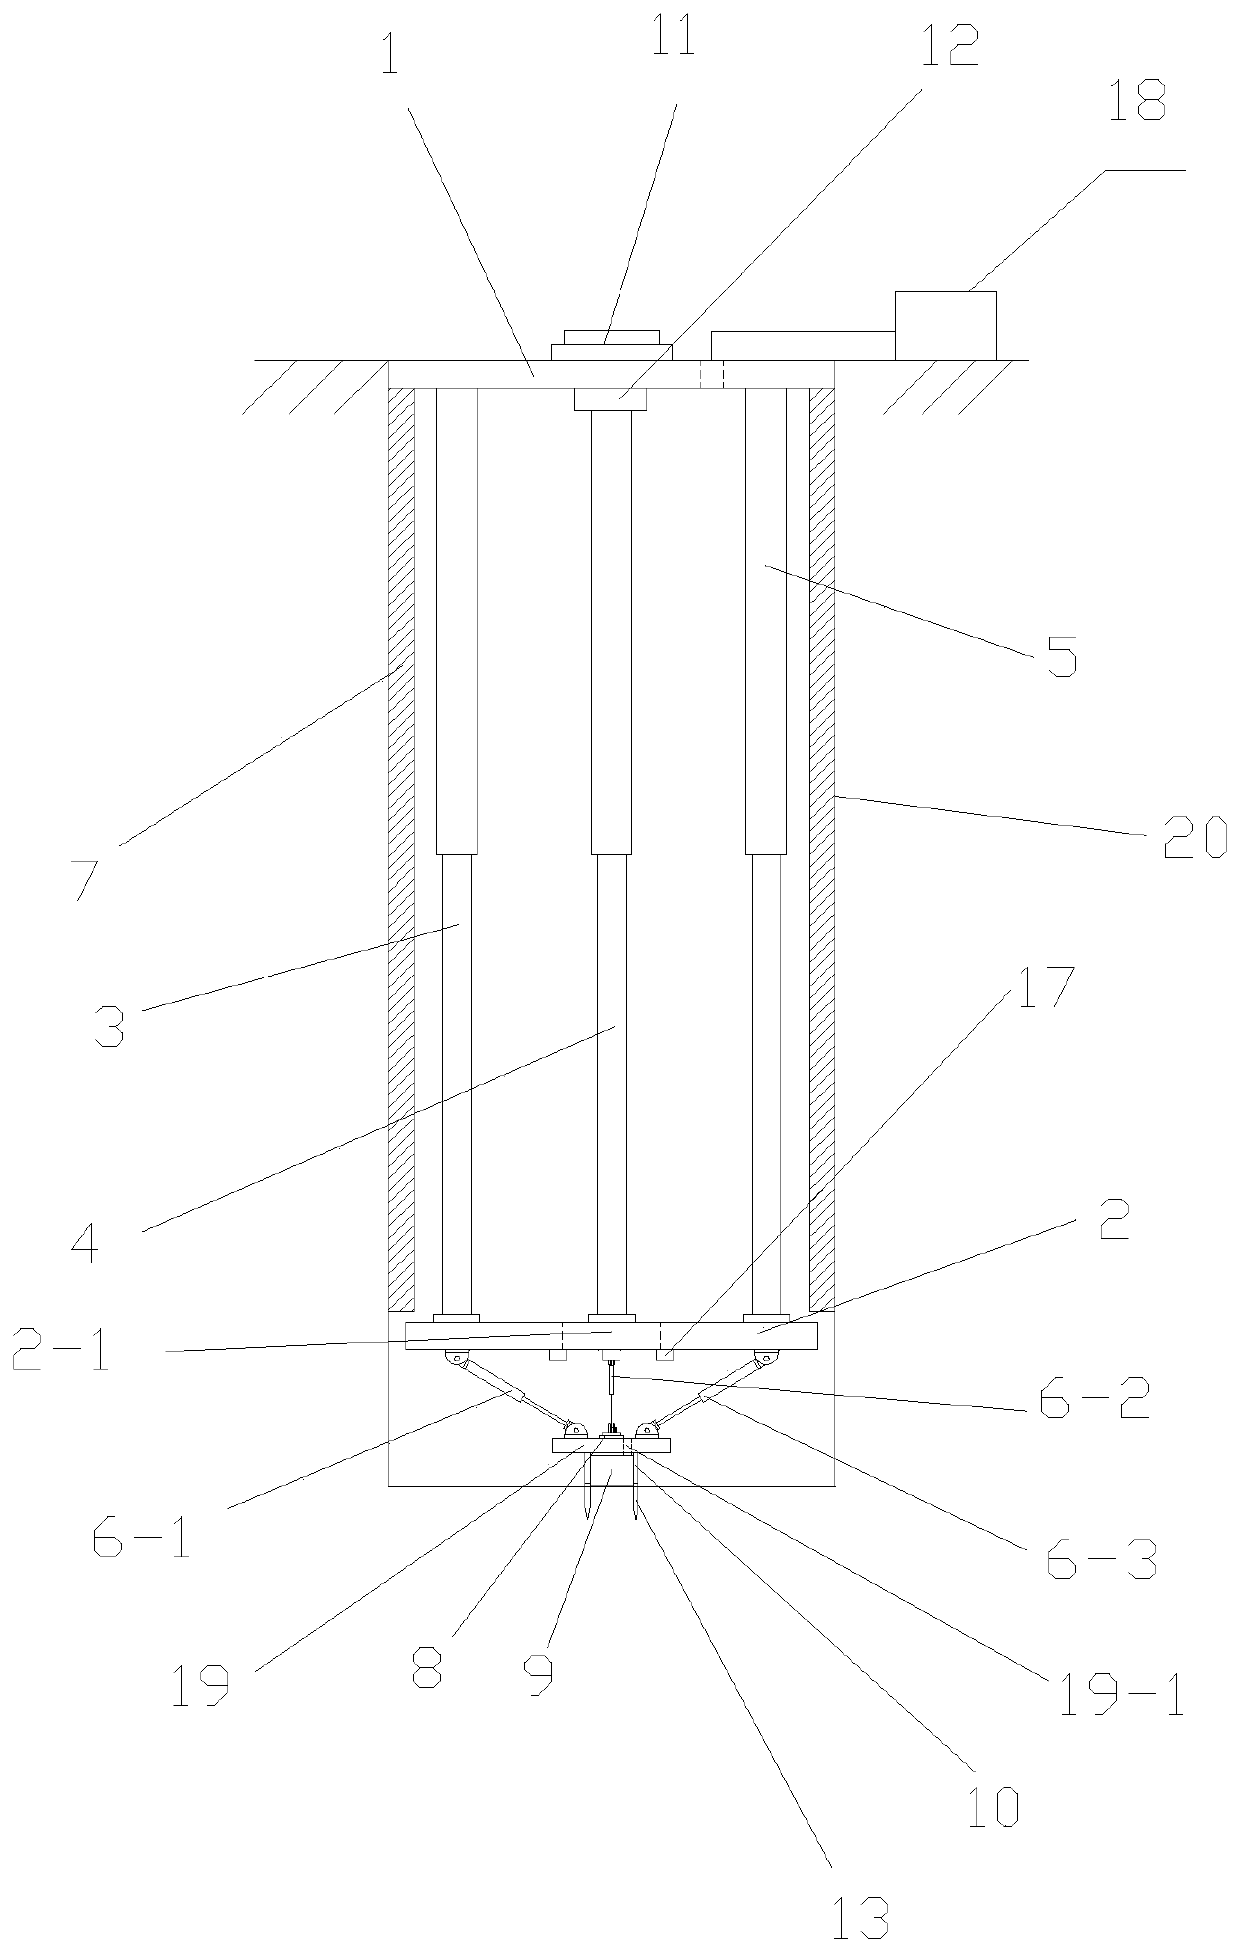 Vibration monitor applied to depth direction and monitoring method